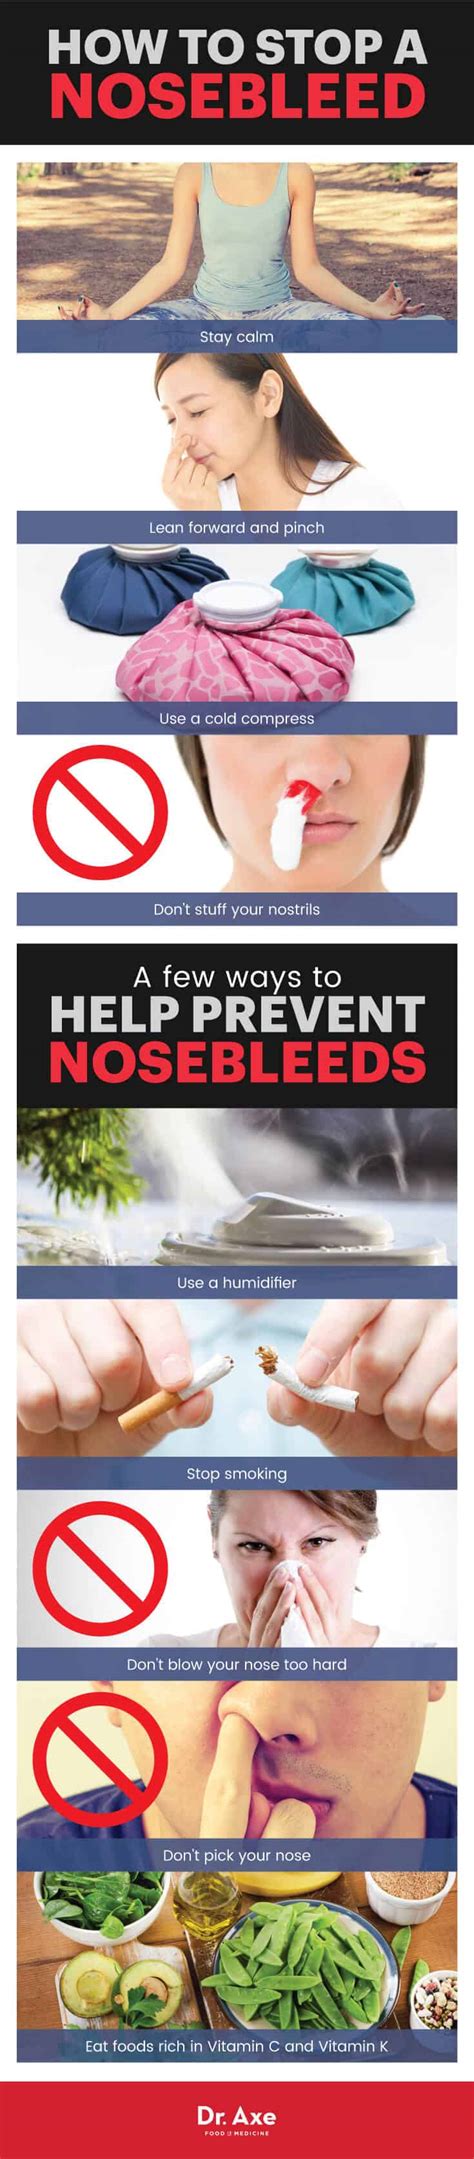 How To Stop A Nosebleed 4 Home Remedies Best Pure Essential Oils